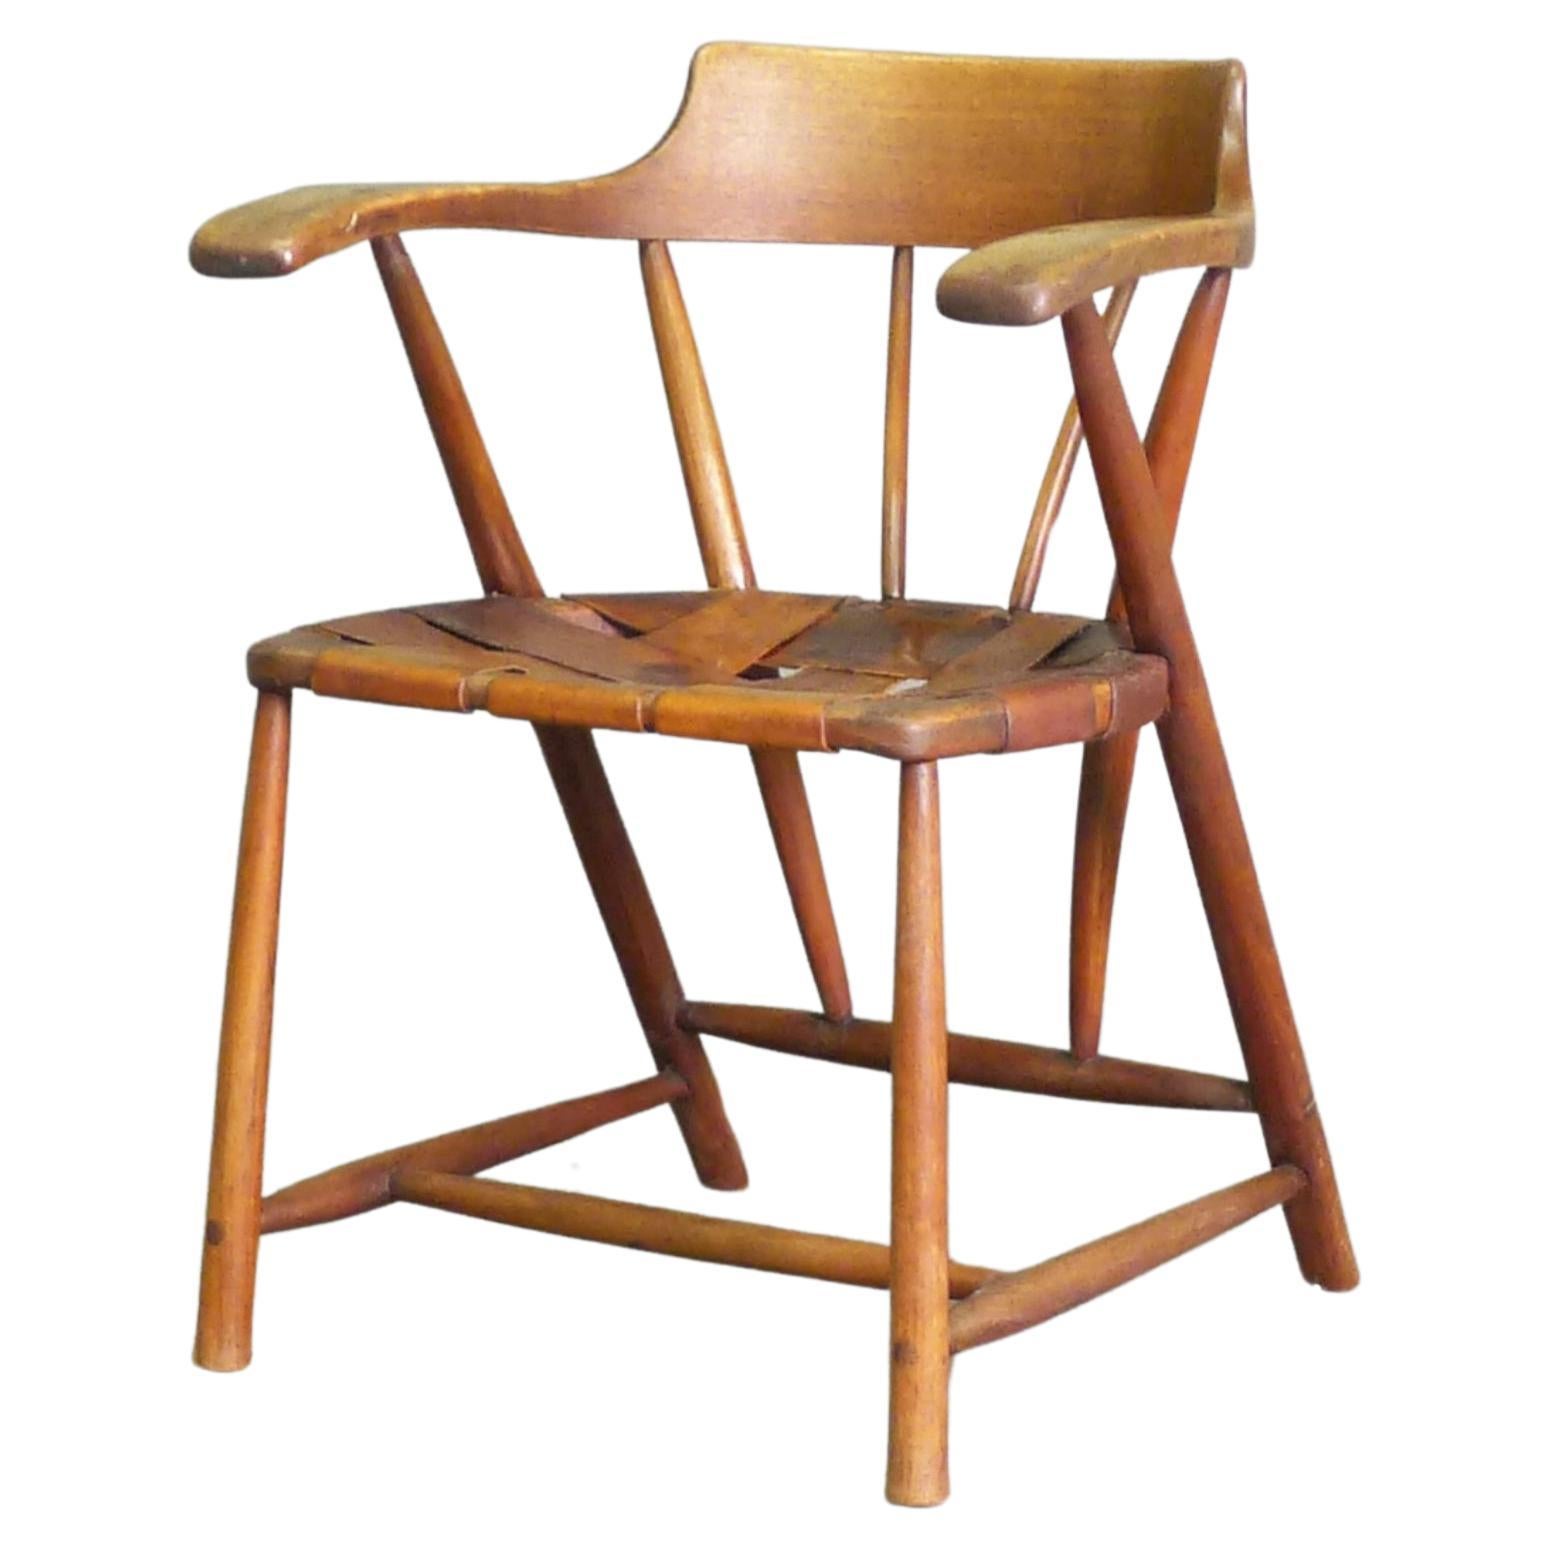 Wharton Esherick, Captains Chair, walnut and leather, initialled and dated 1951 For Sale